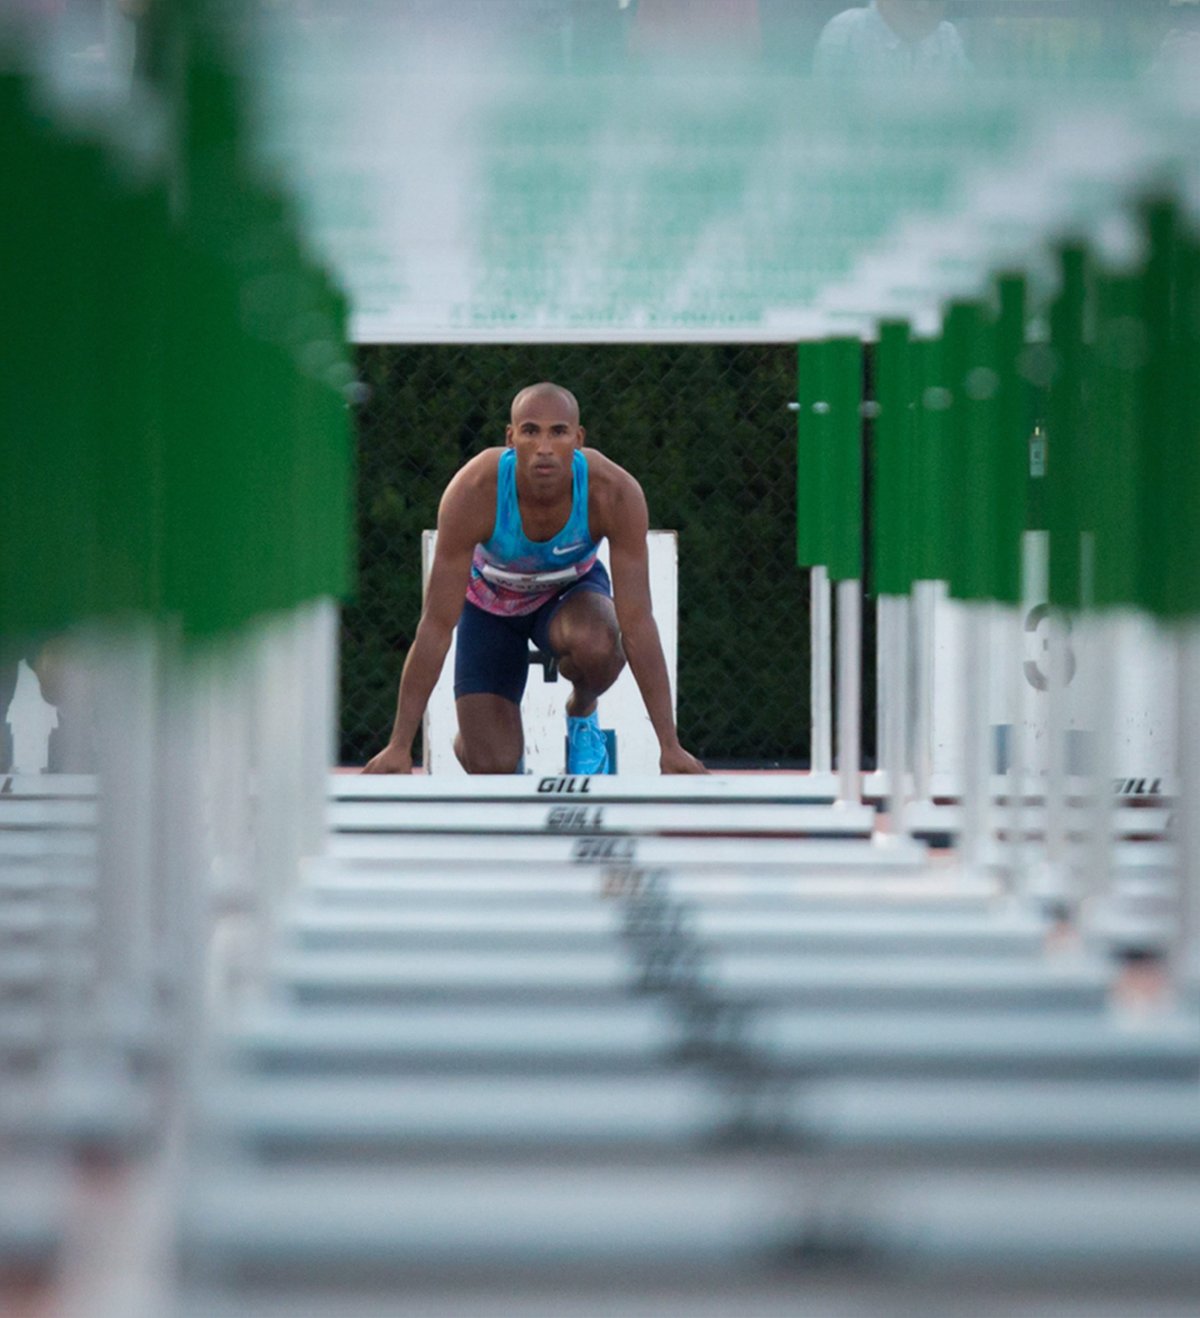 Canada's Damian Warner, of London, Ont., is framed by hurdles as he waits in the starting blocks before racing to a first place finish in the men's 110 metre hurdles at the Harry Jerome International Track Classic in Coquitlam, B.C., on Wednesday June 28, 2017. THE CANADIAN PRESS/Darryl Dyck.